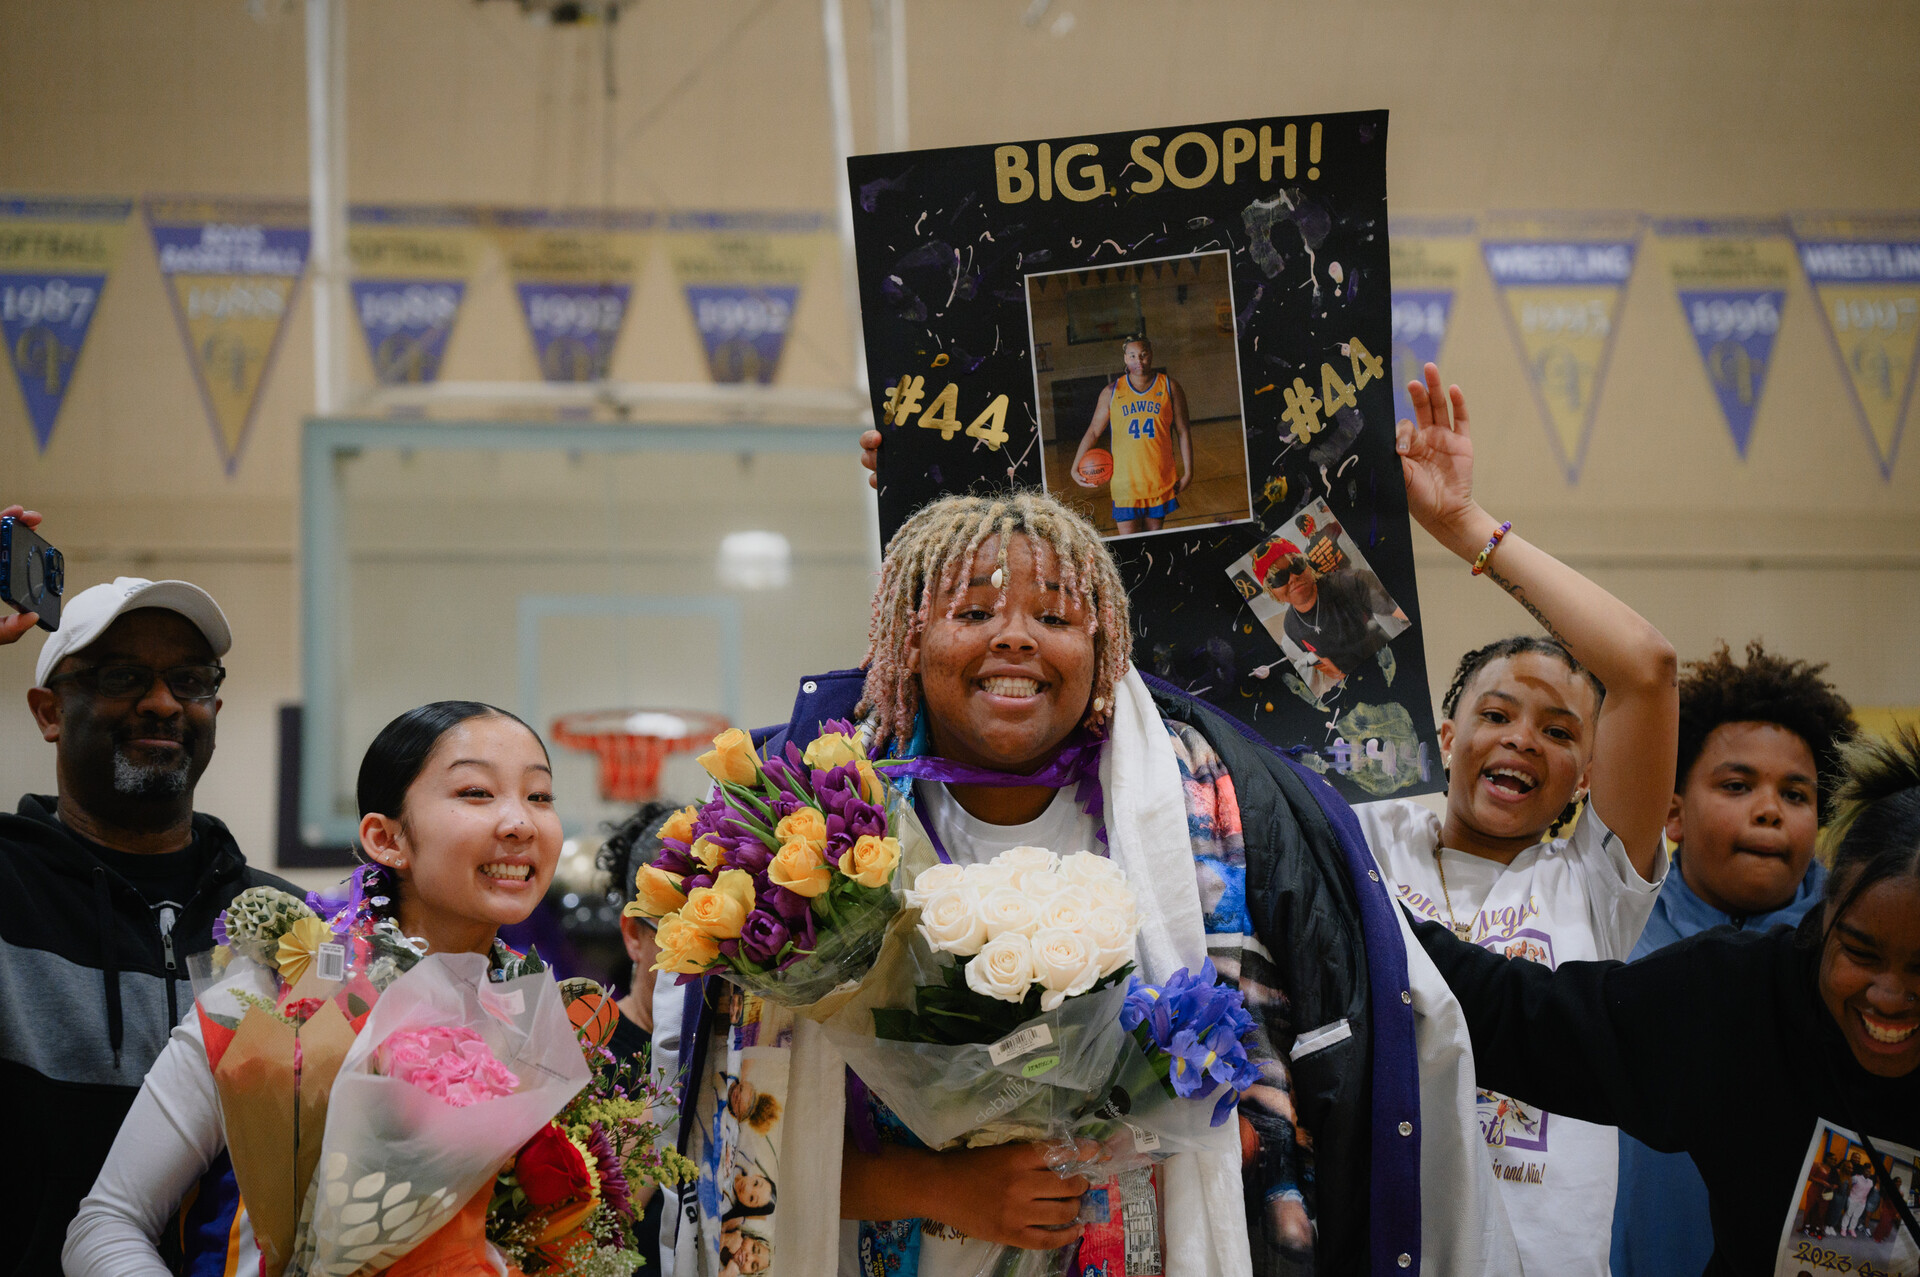 Two broadly smiling teenage girls, one shorter, Asian, with dark hair, one taller, Black, with blonde braids, stand in the middle of a basketball court holding flowers surrounded by friends and family. Children behind the girl in the center hold a homemade sign reading 'Big Soph!'